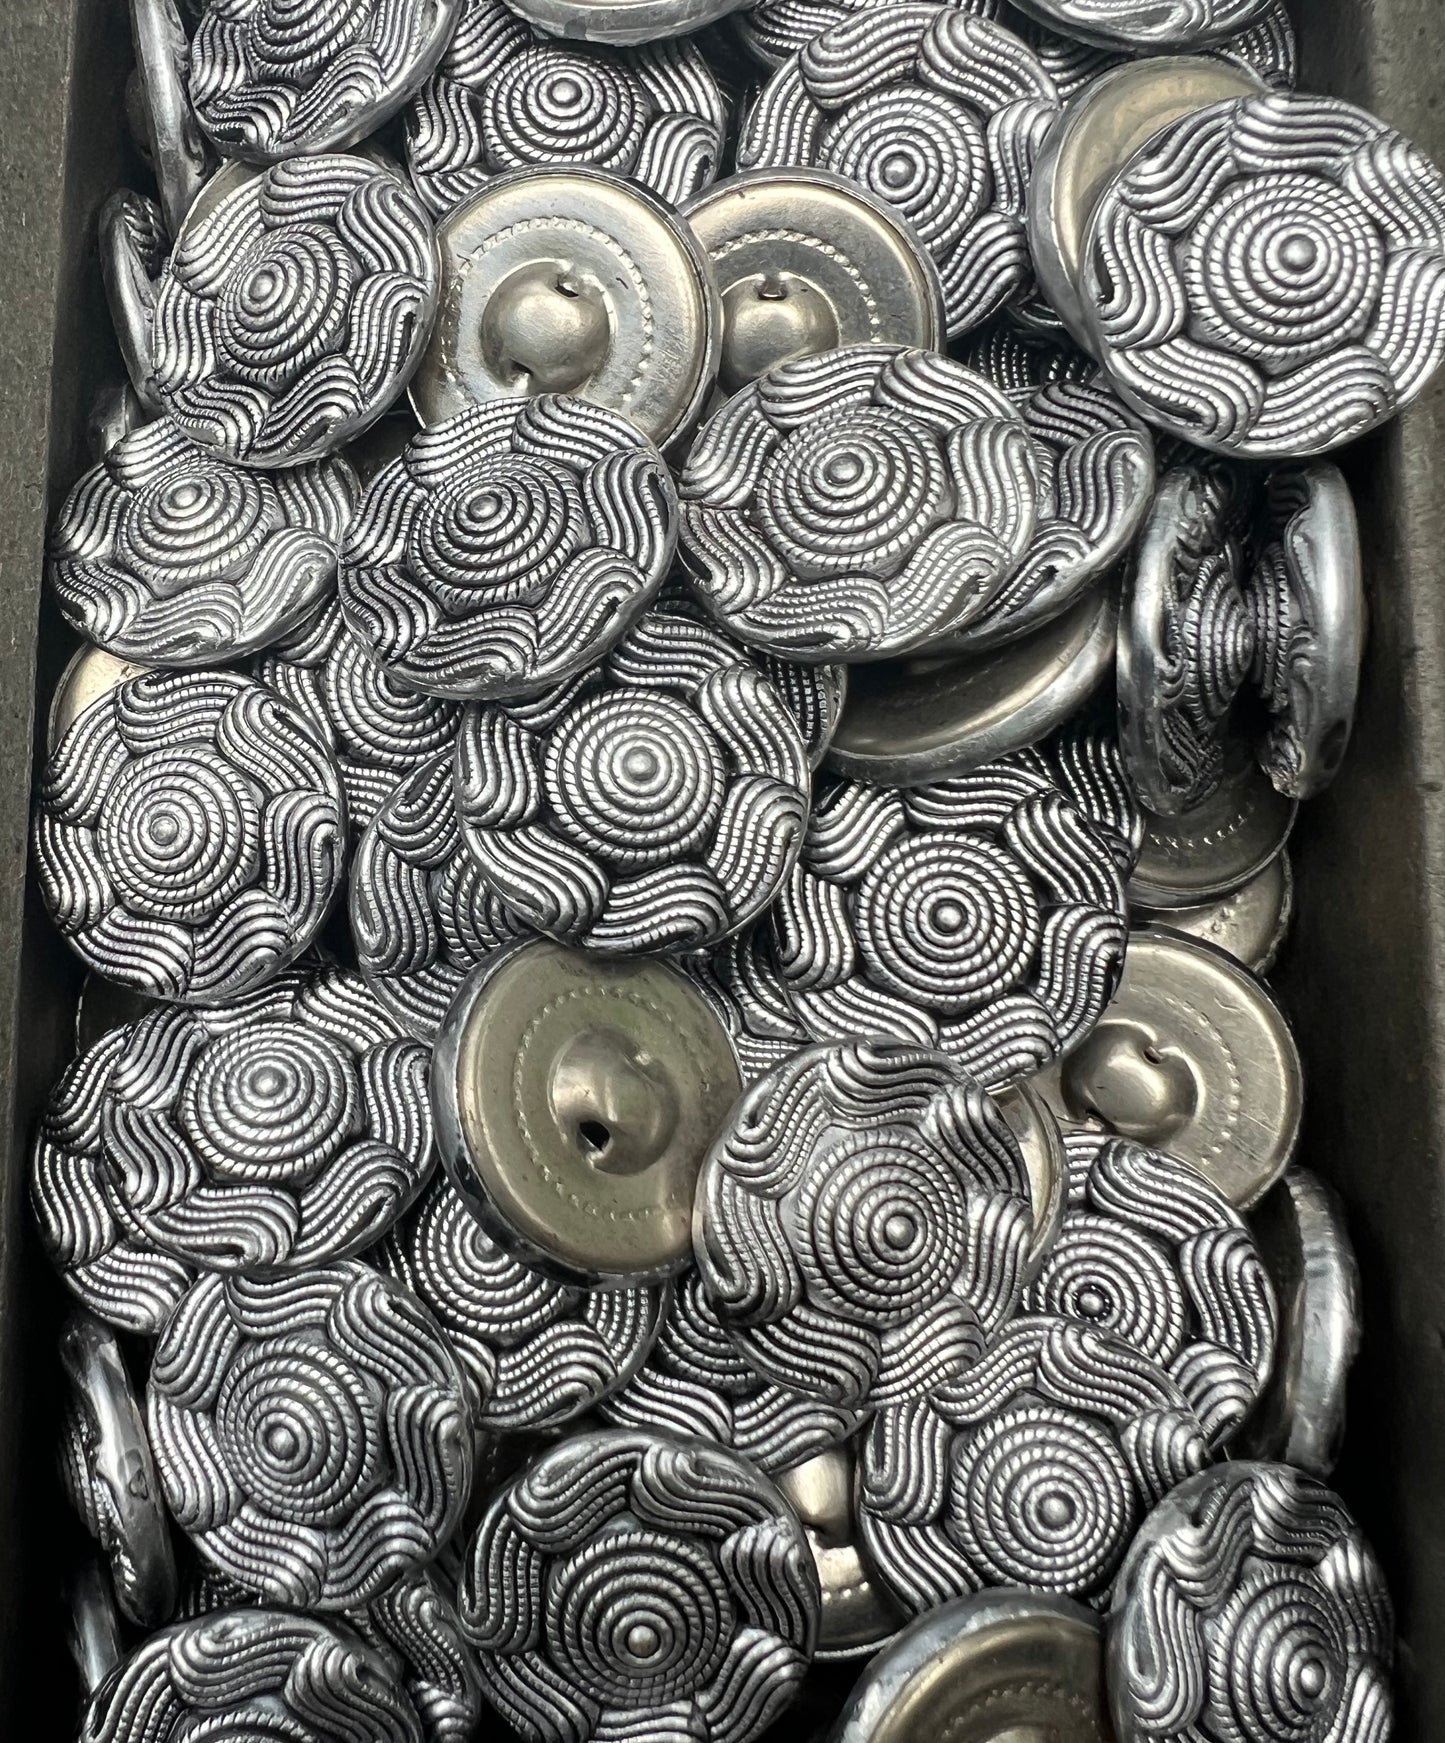 1 Gross -144 - VINTAGE Swirly Silver Metal Buttons - 2.3cm wide